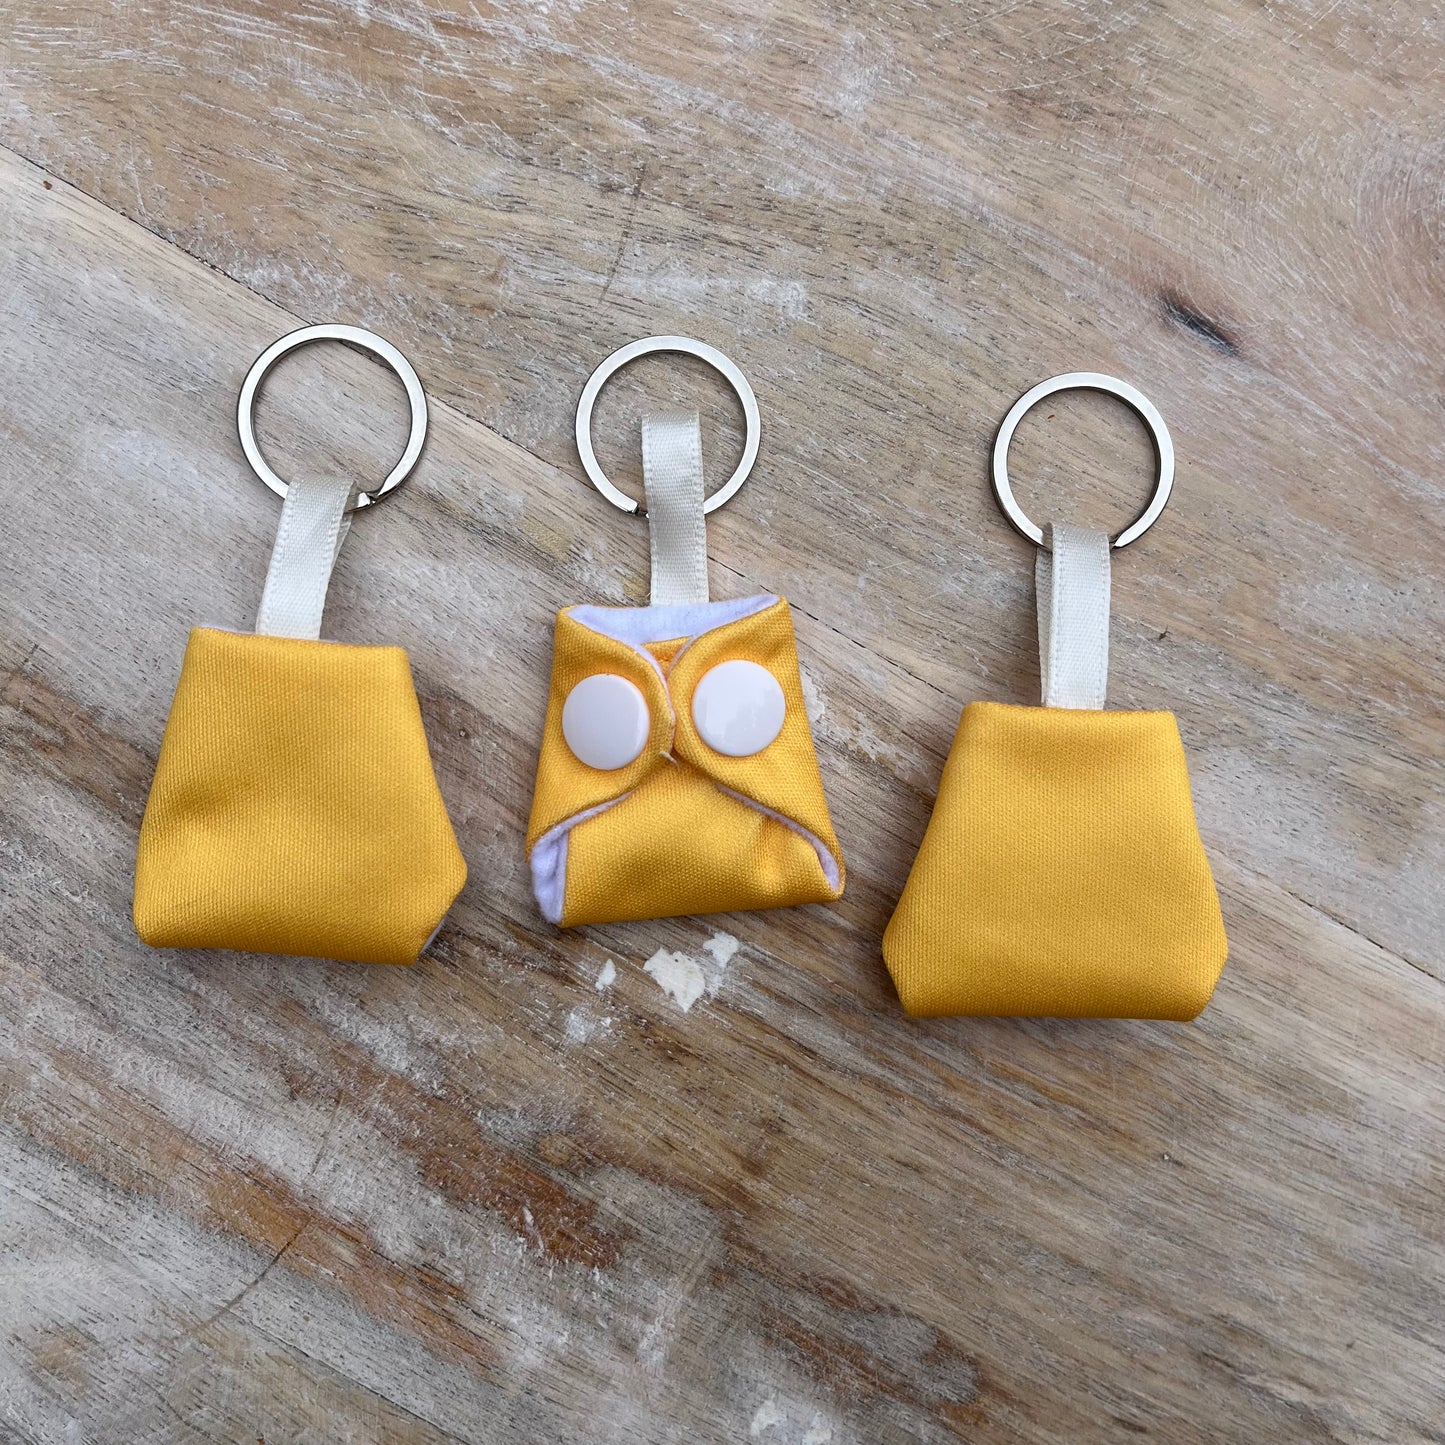 Mini Diaper Keychain - Life In Color Collection